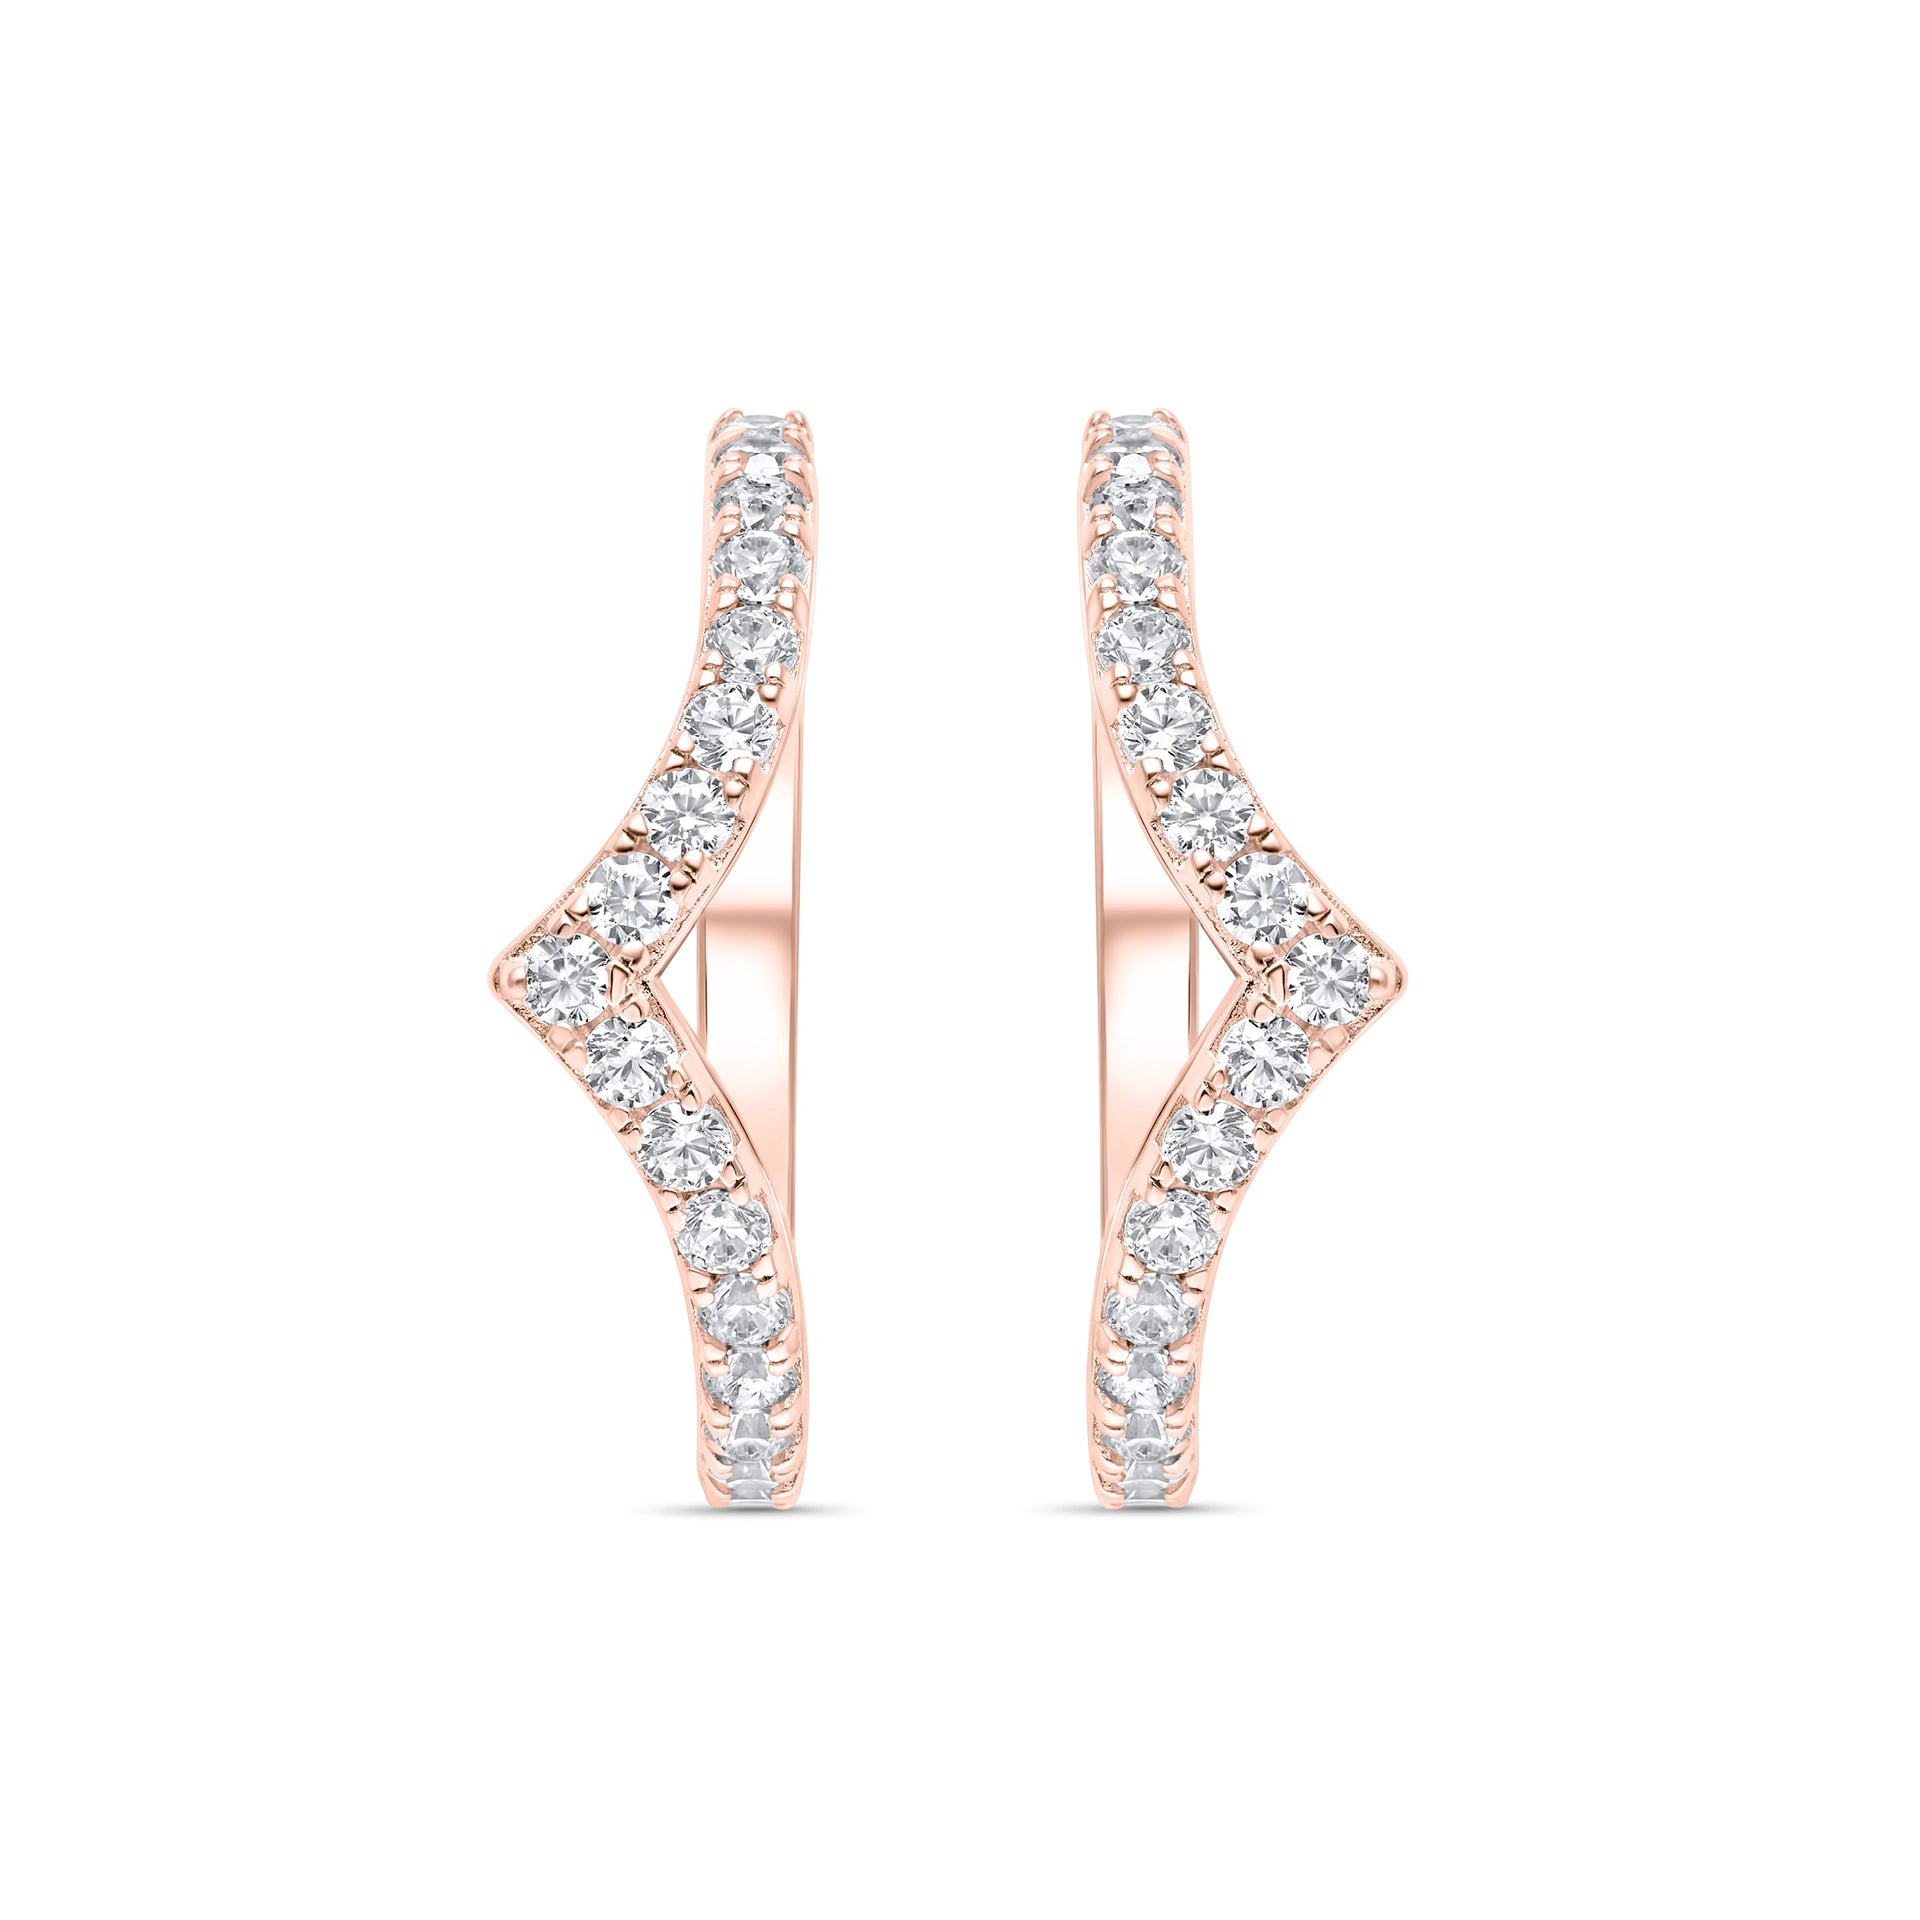 A set of rose gold chevron style wedding bands with a half eternity design